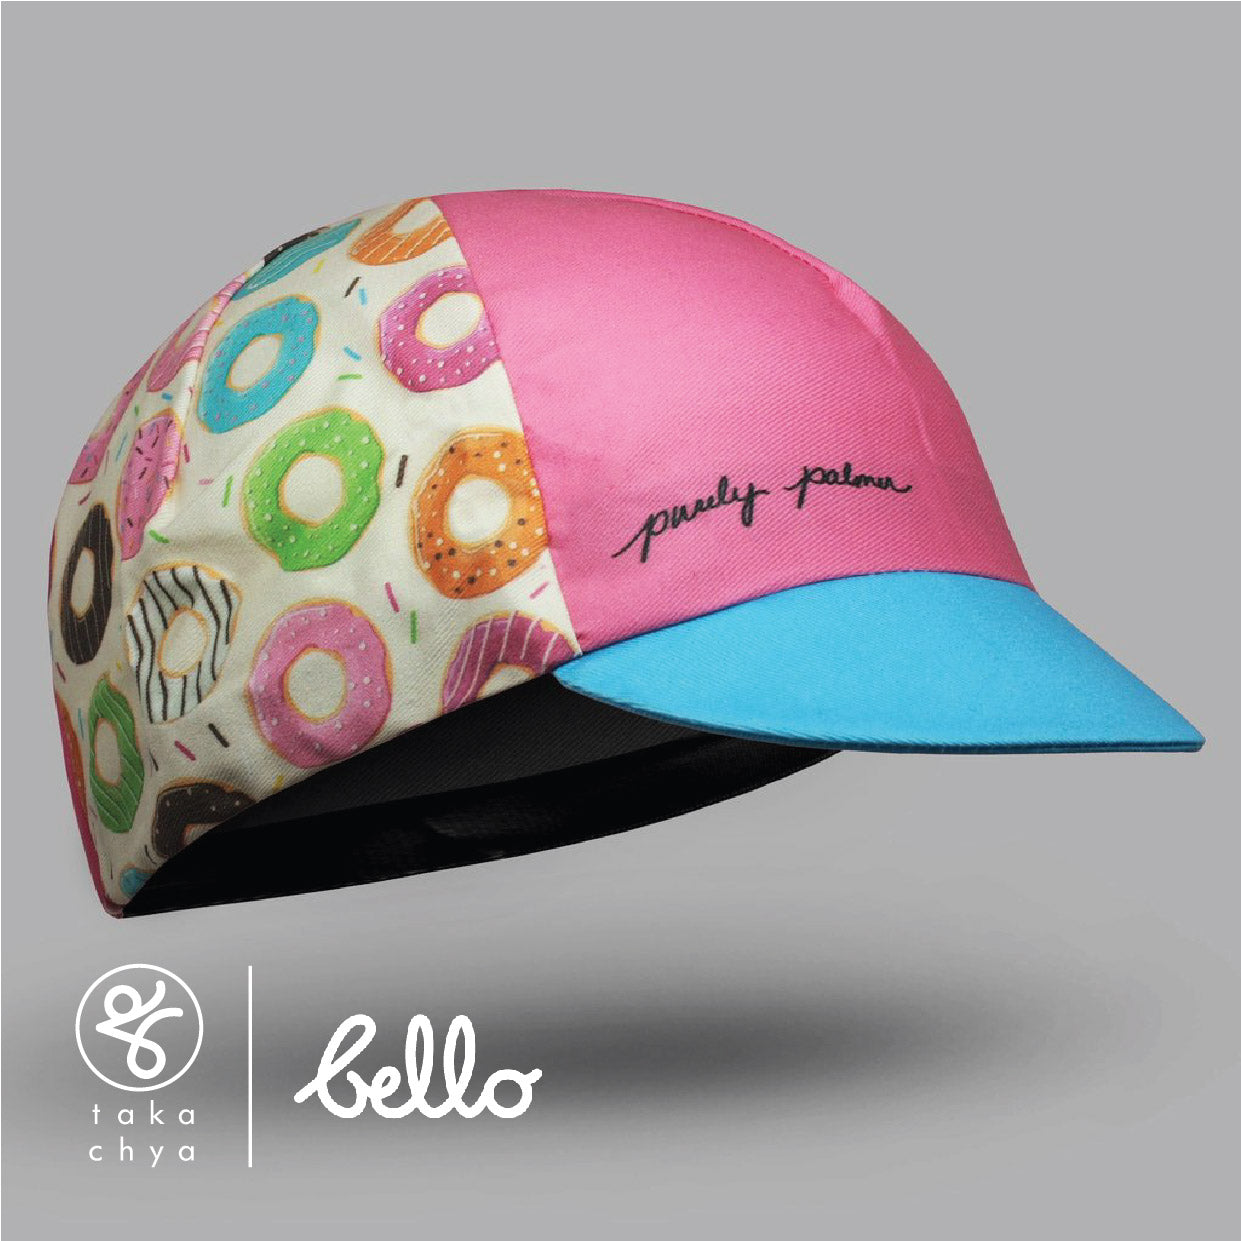 Donut Mess with my Ride Time - Bello Cyclist Designer Collaboration Cycling Cap